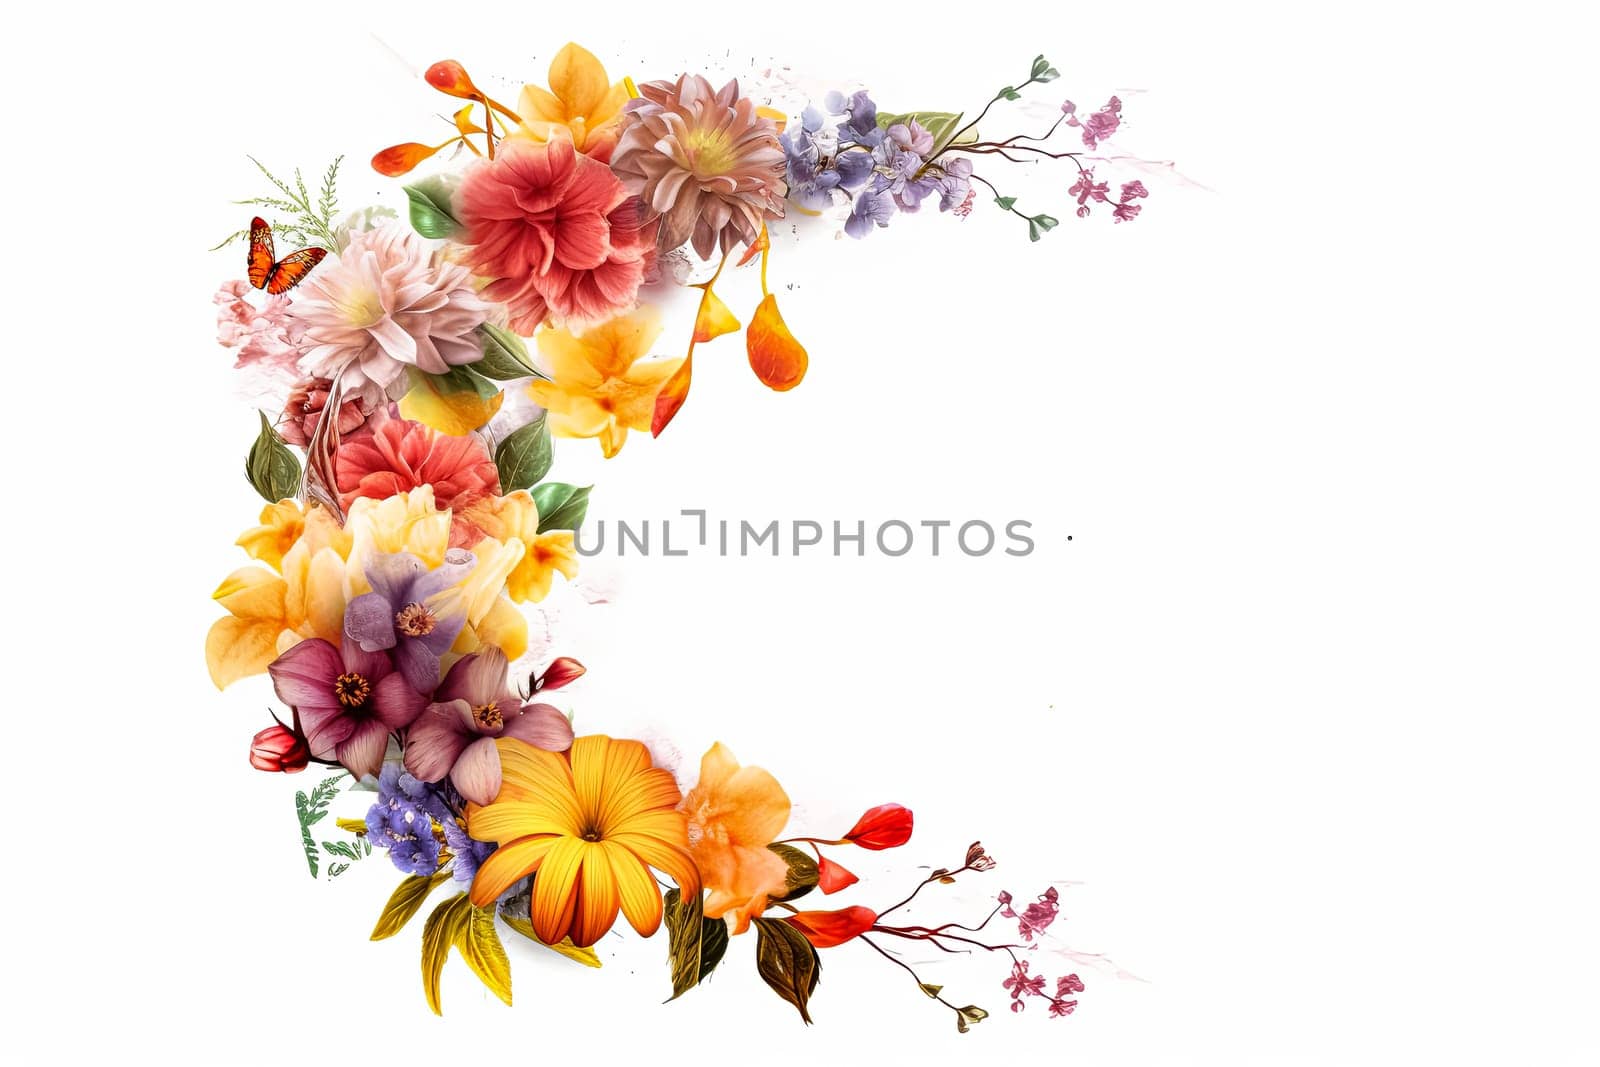 A flower arrangement with pink and white flowers. The flowers are arranged in a way that creates a sense of movement and flow. Scene is one of beauty and elegance